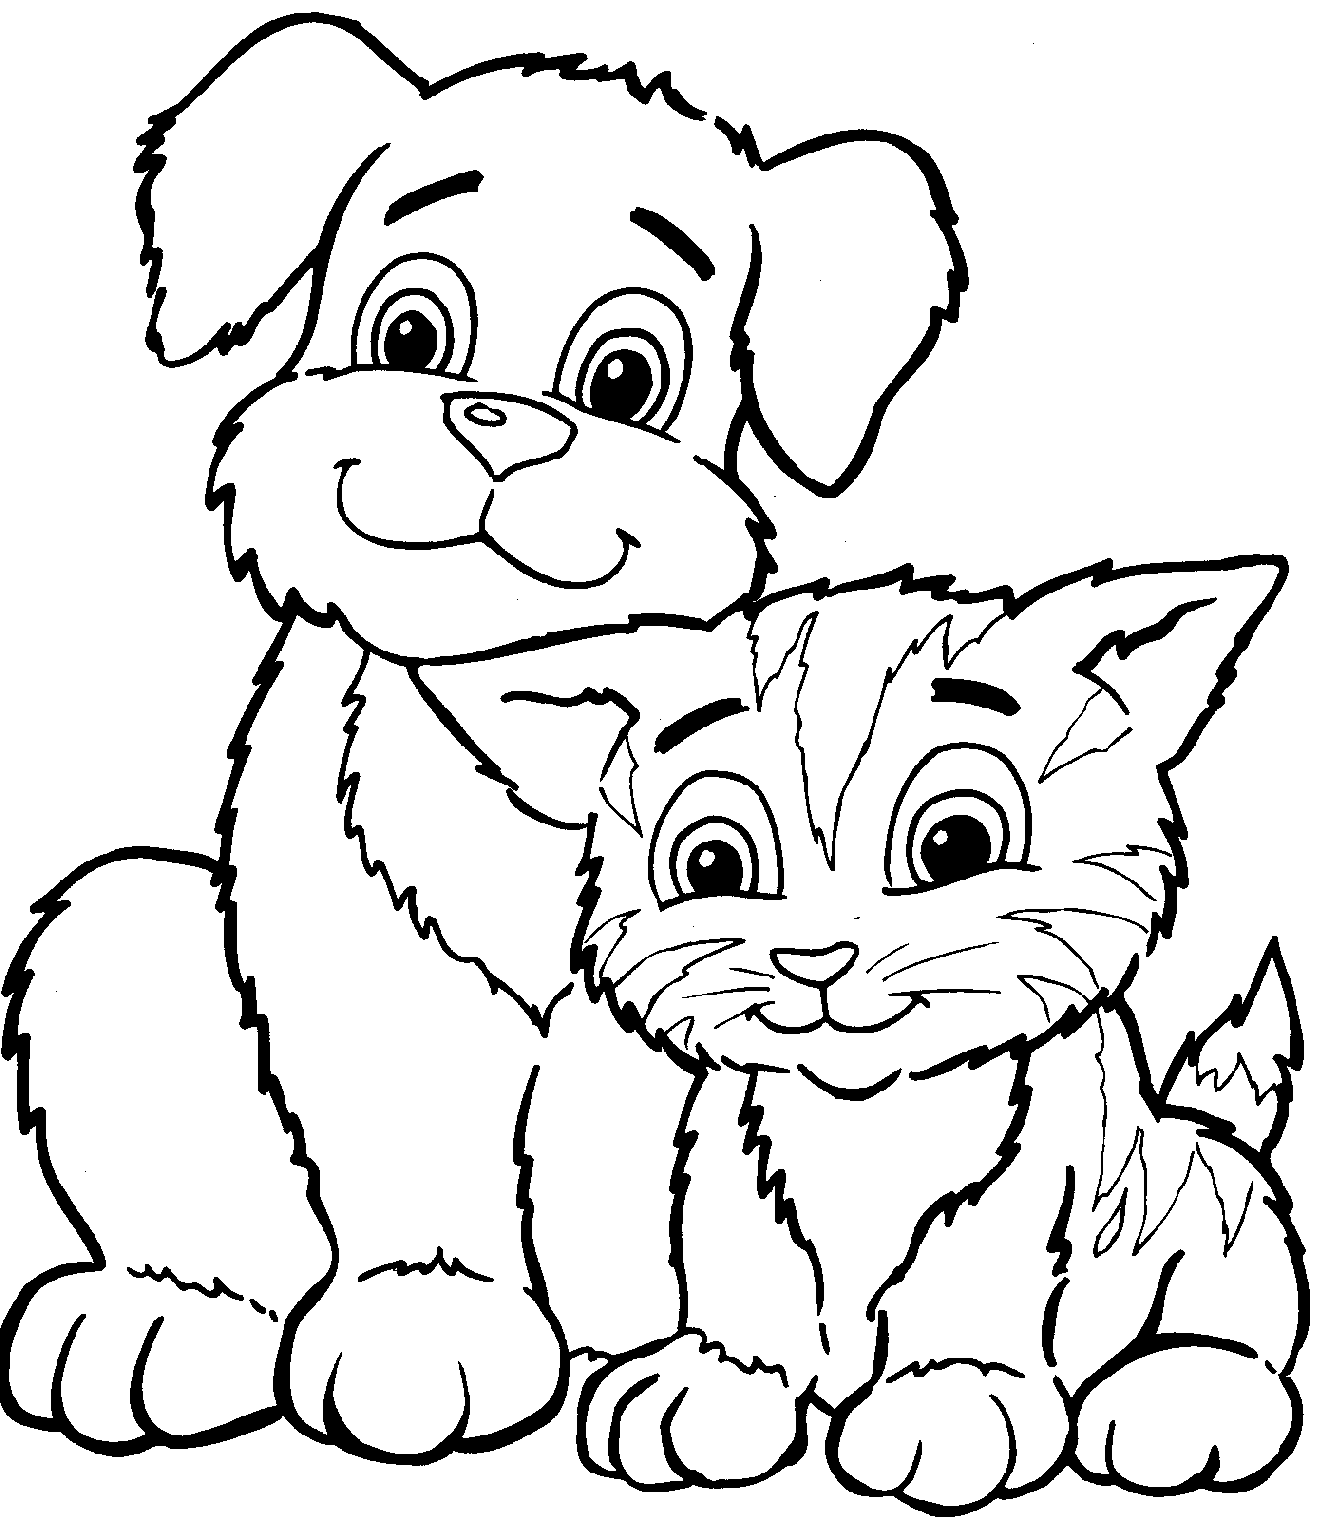 cat color page free printable cat coloring pages for kids cat color page 